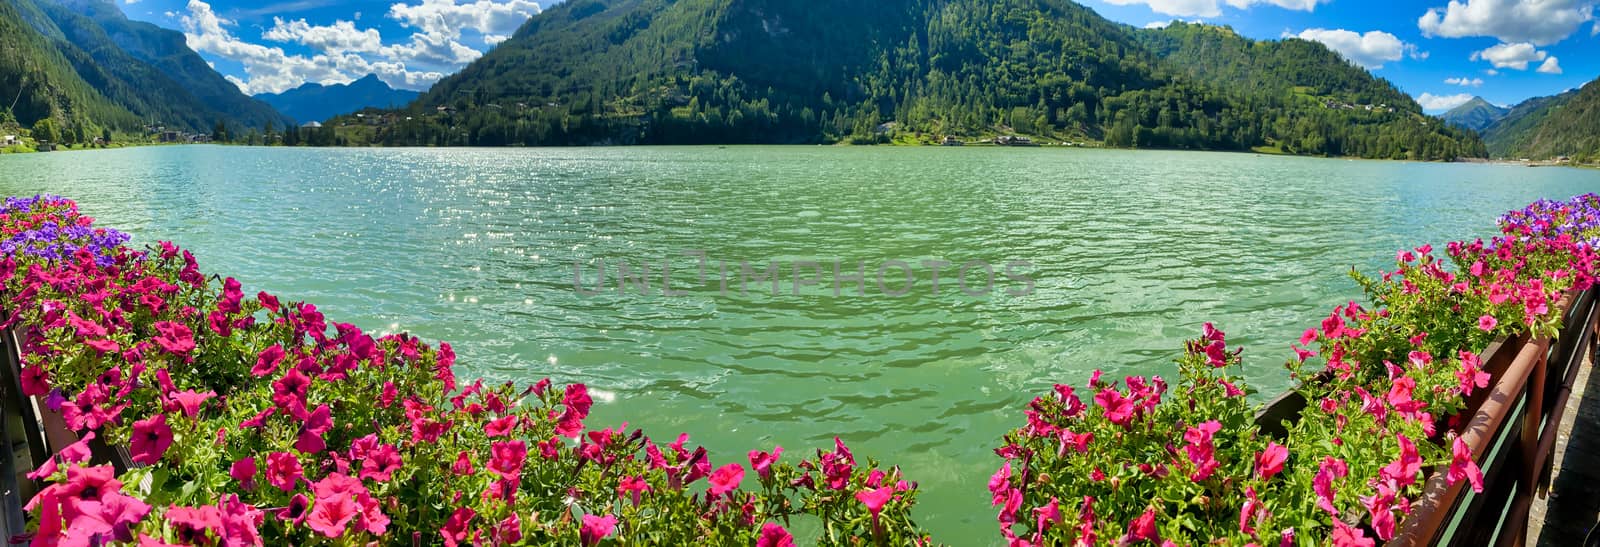 Beautiful lake of Alleghe in summer season, Italy by jovannig